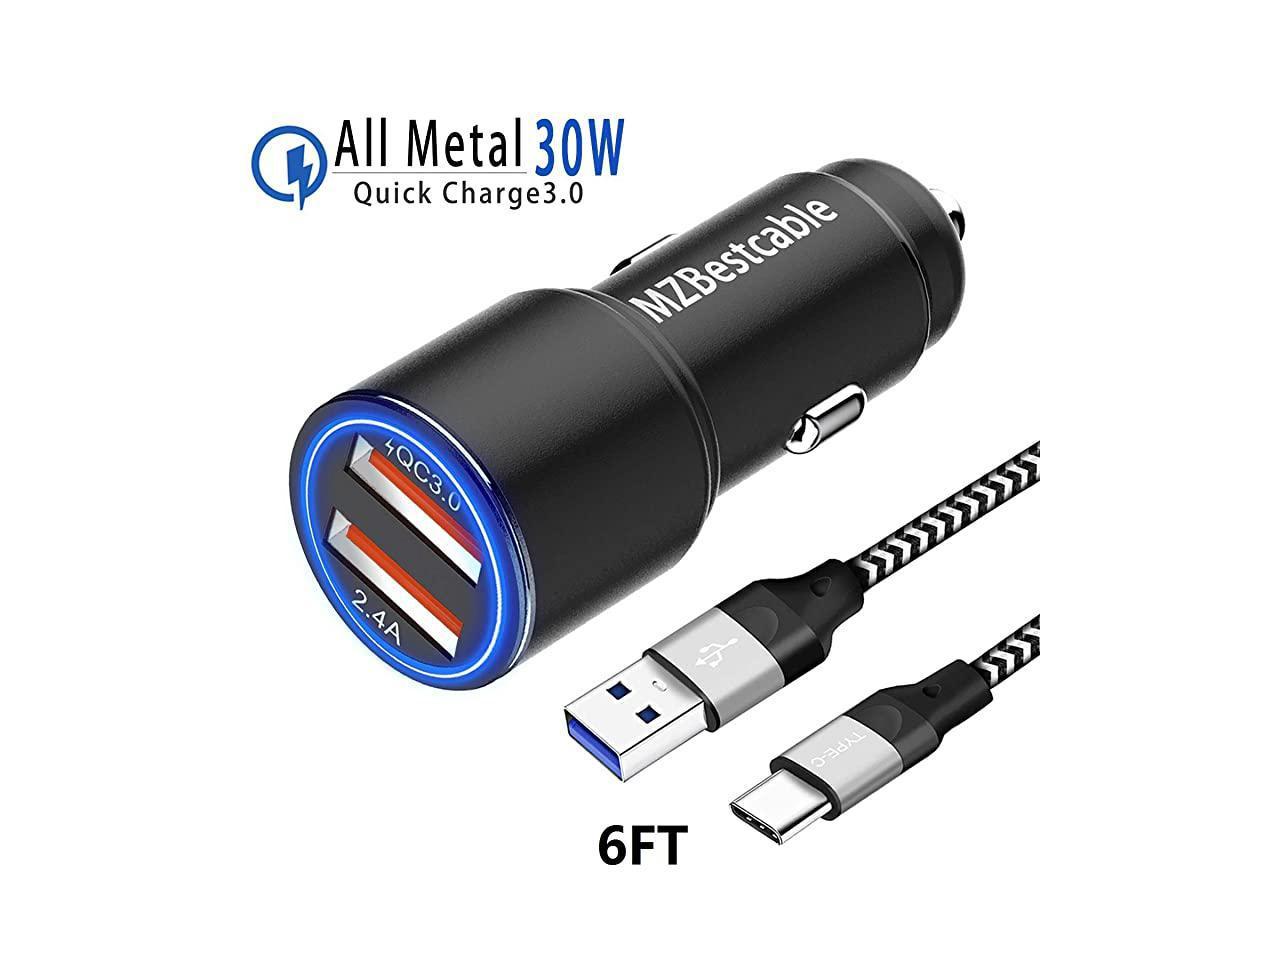 QC3.0 Car Adapter with 6ft Type C Cable Dual Port Fast Charging USB C Car Phone Charger Compatible for Samsung Galaxy S20 S10e/S9/S8/Note 10/9/8,Google Pixel 3A/4/4XL,LG G5/G6/V20/V30,Moto G7/G8/Z4 